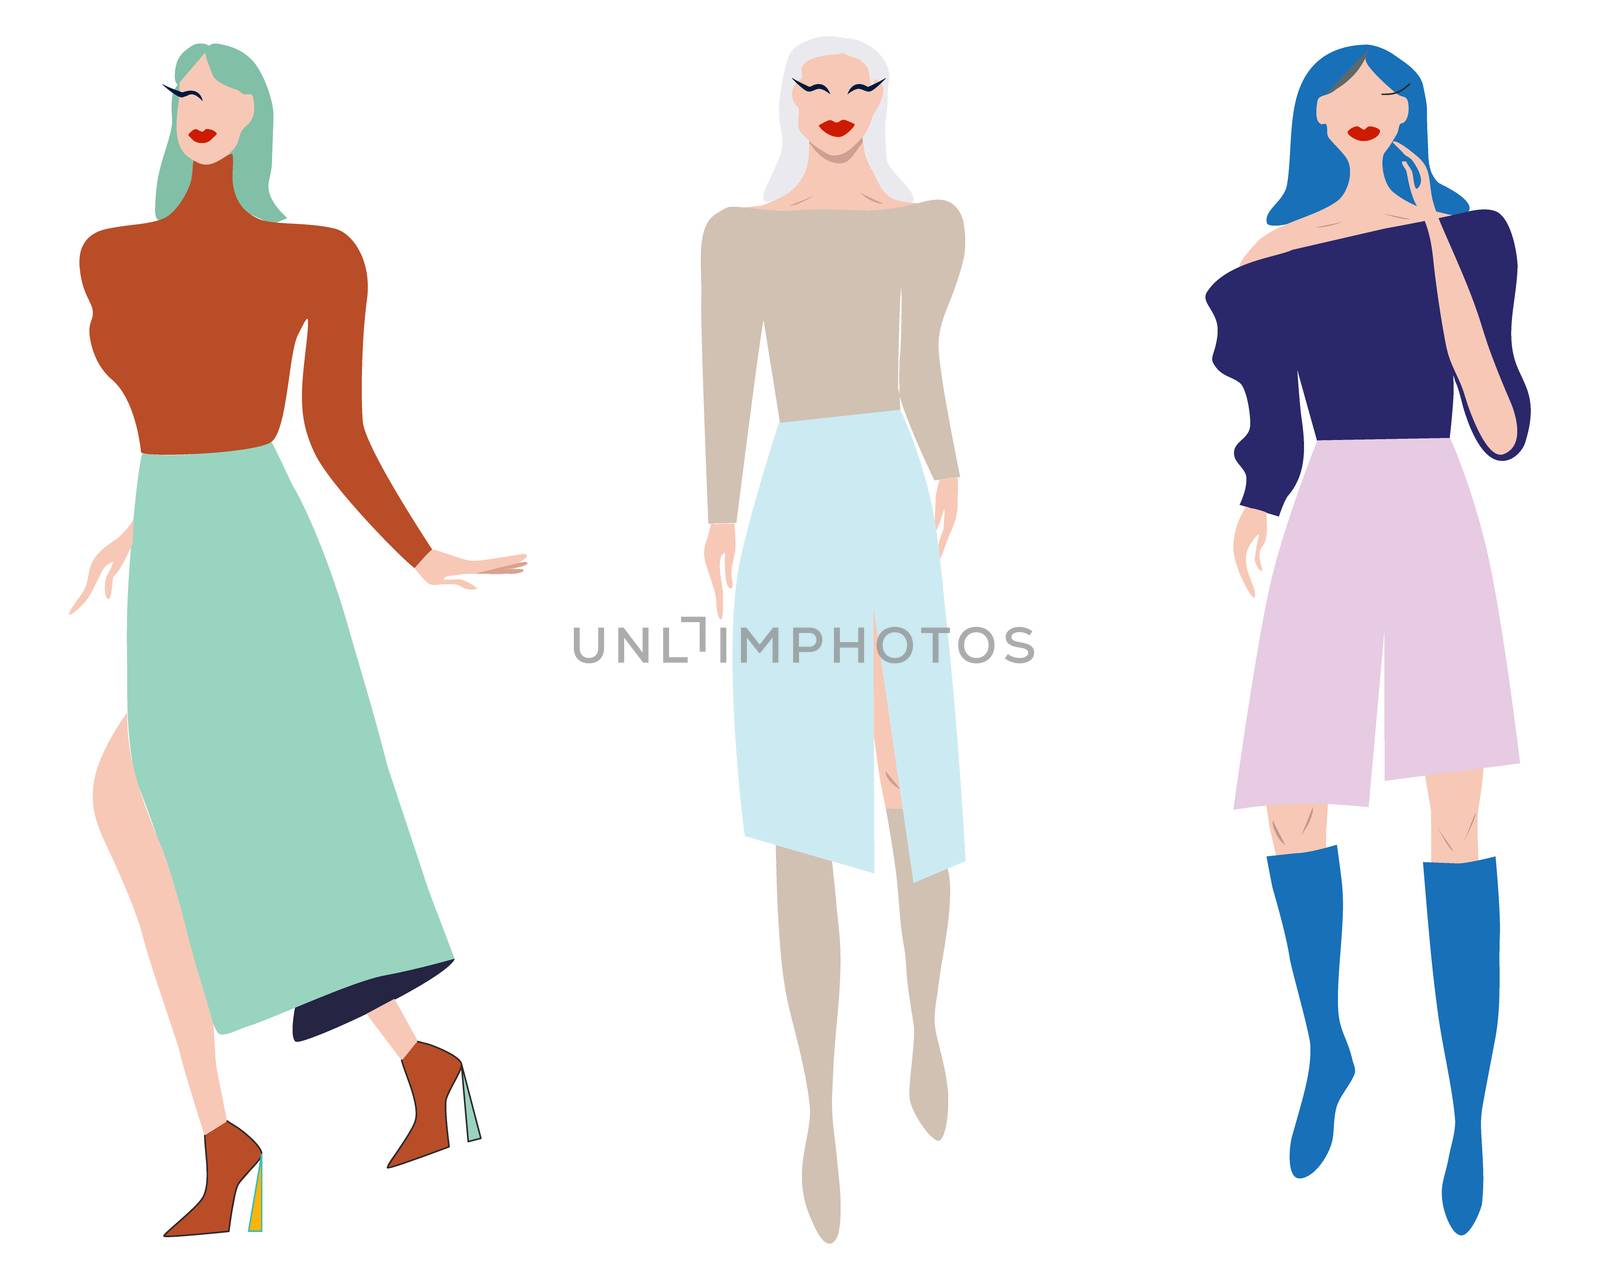 Group of females street style characters collection. Girls models set: female with long skirt ang high heels, knee high skirt and high boots. Happy people flat style vector illustration.